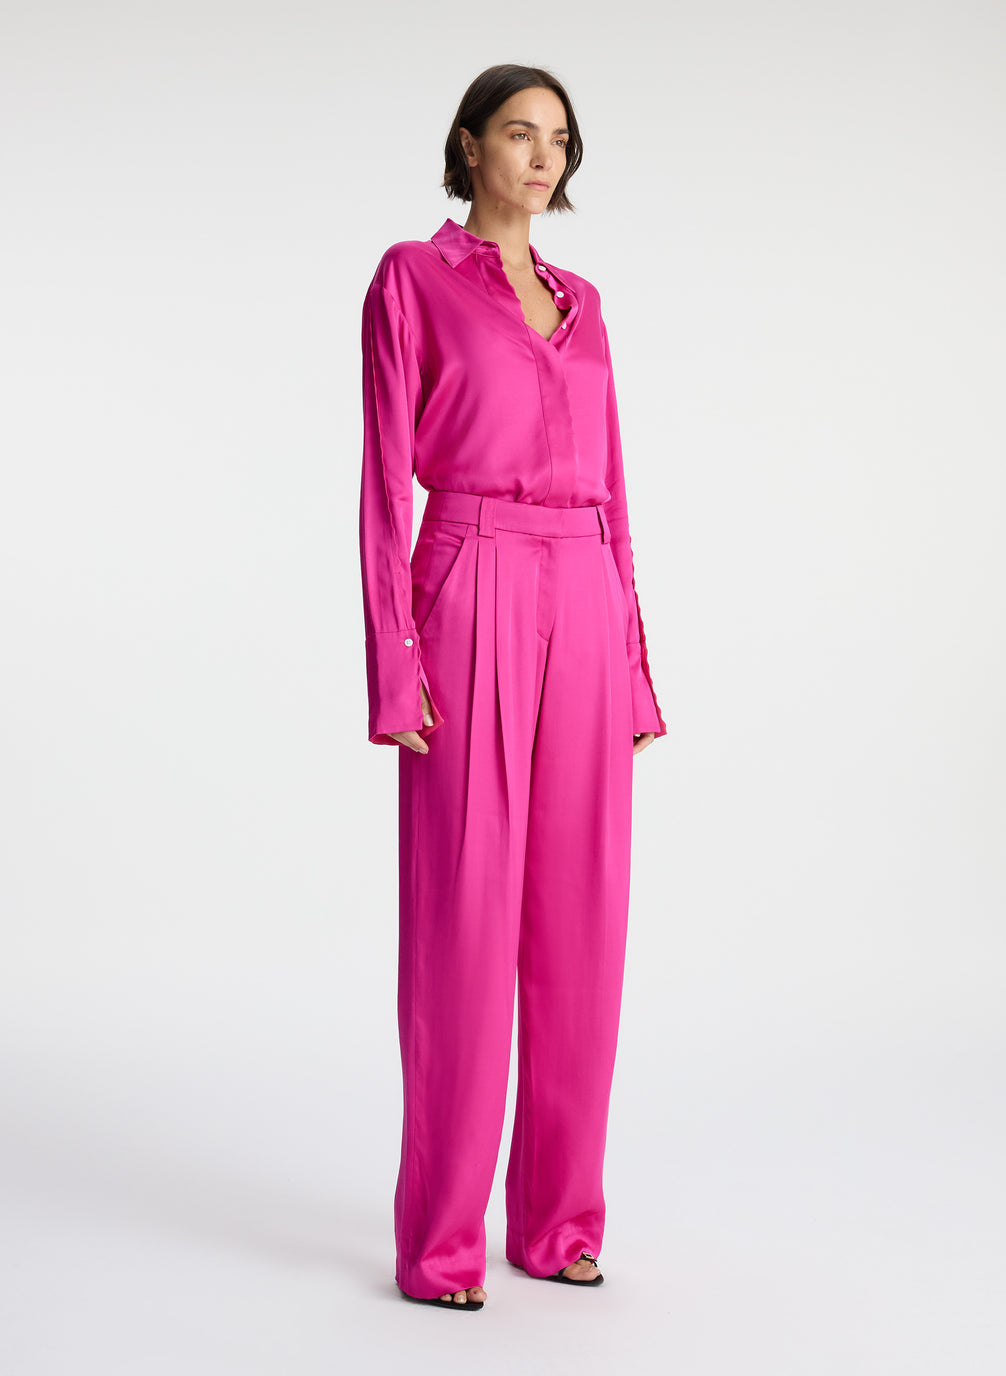 side view of woman wearing bright pink scalloped detailed long sleeve satin shirt and bright pink pants